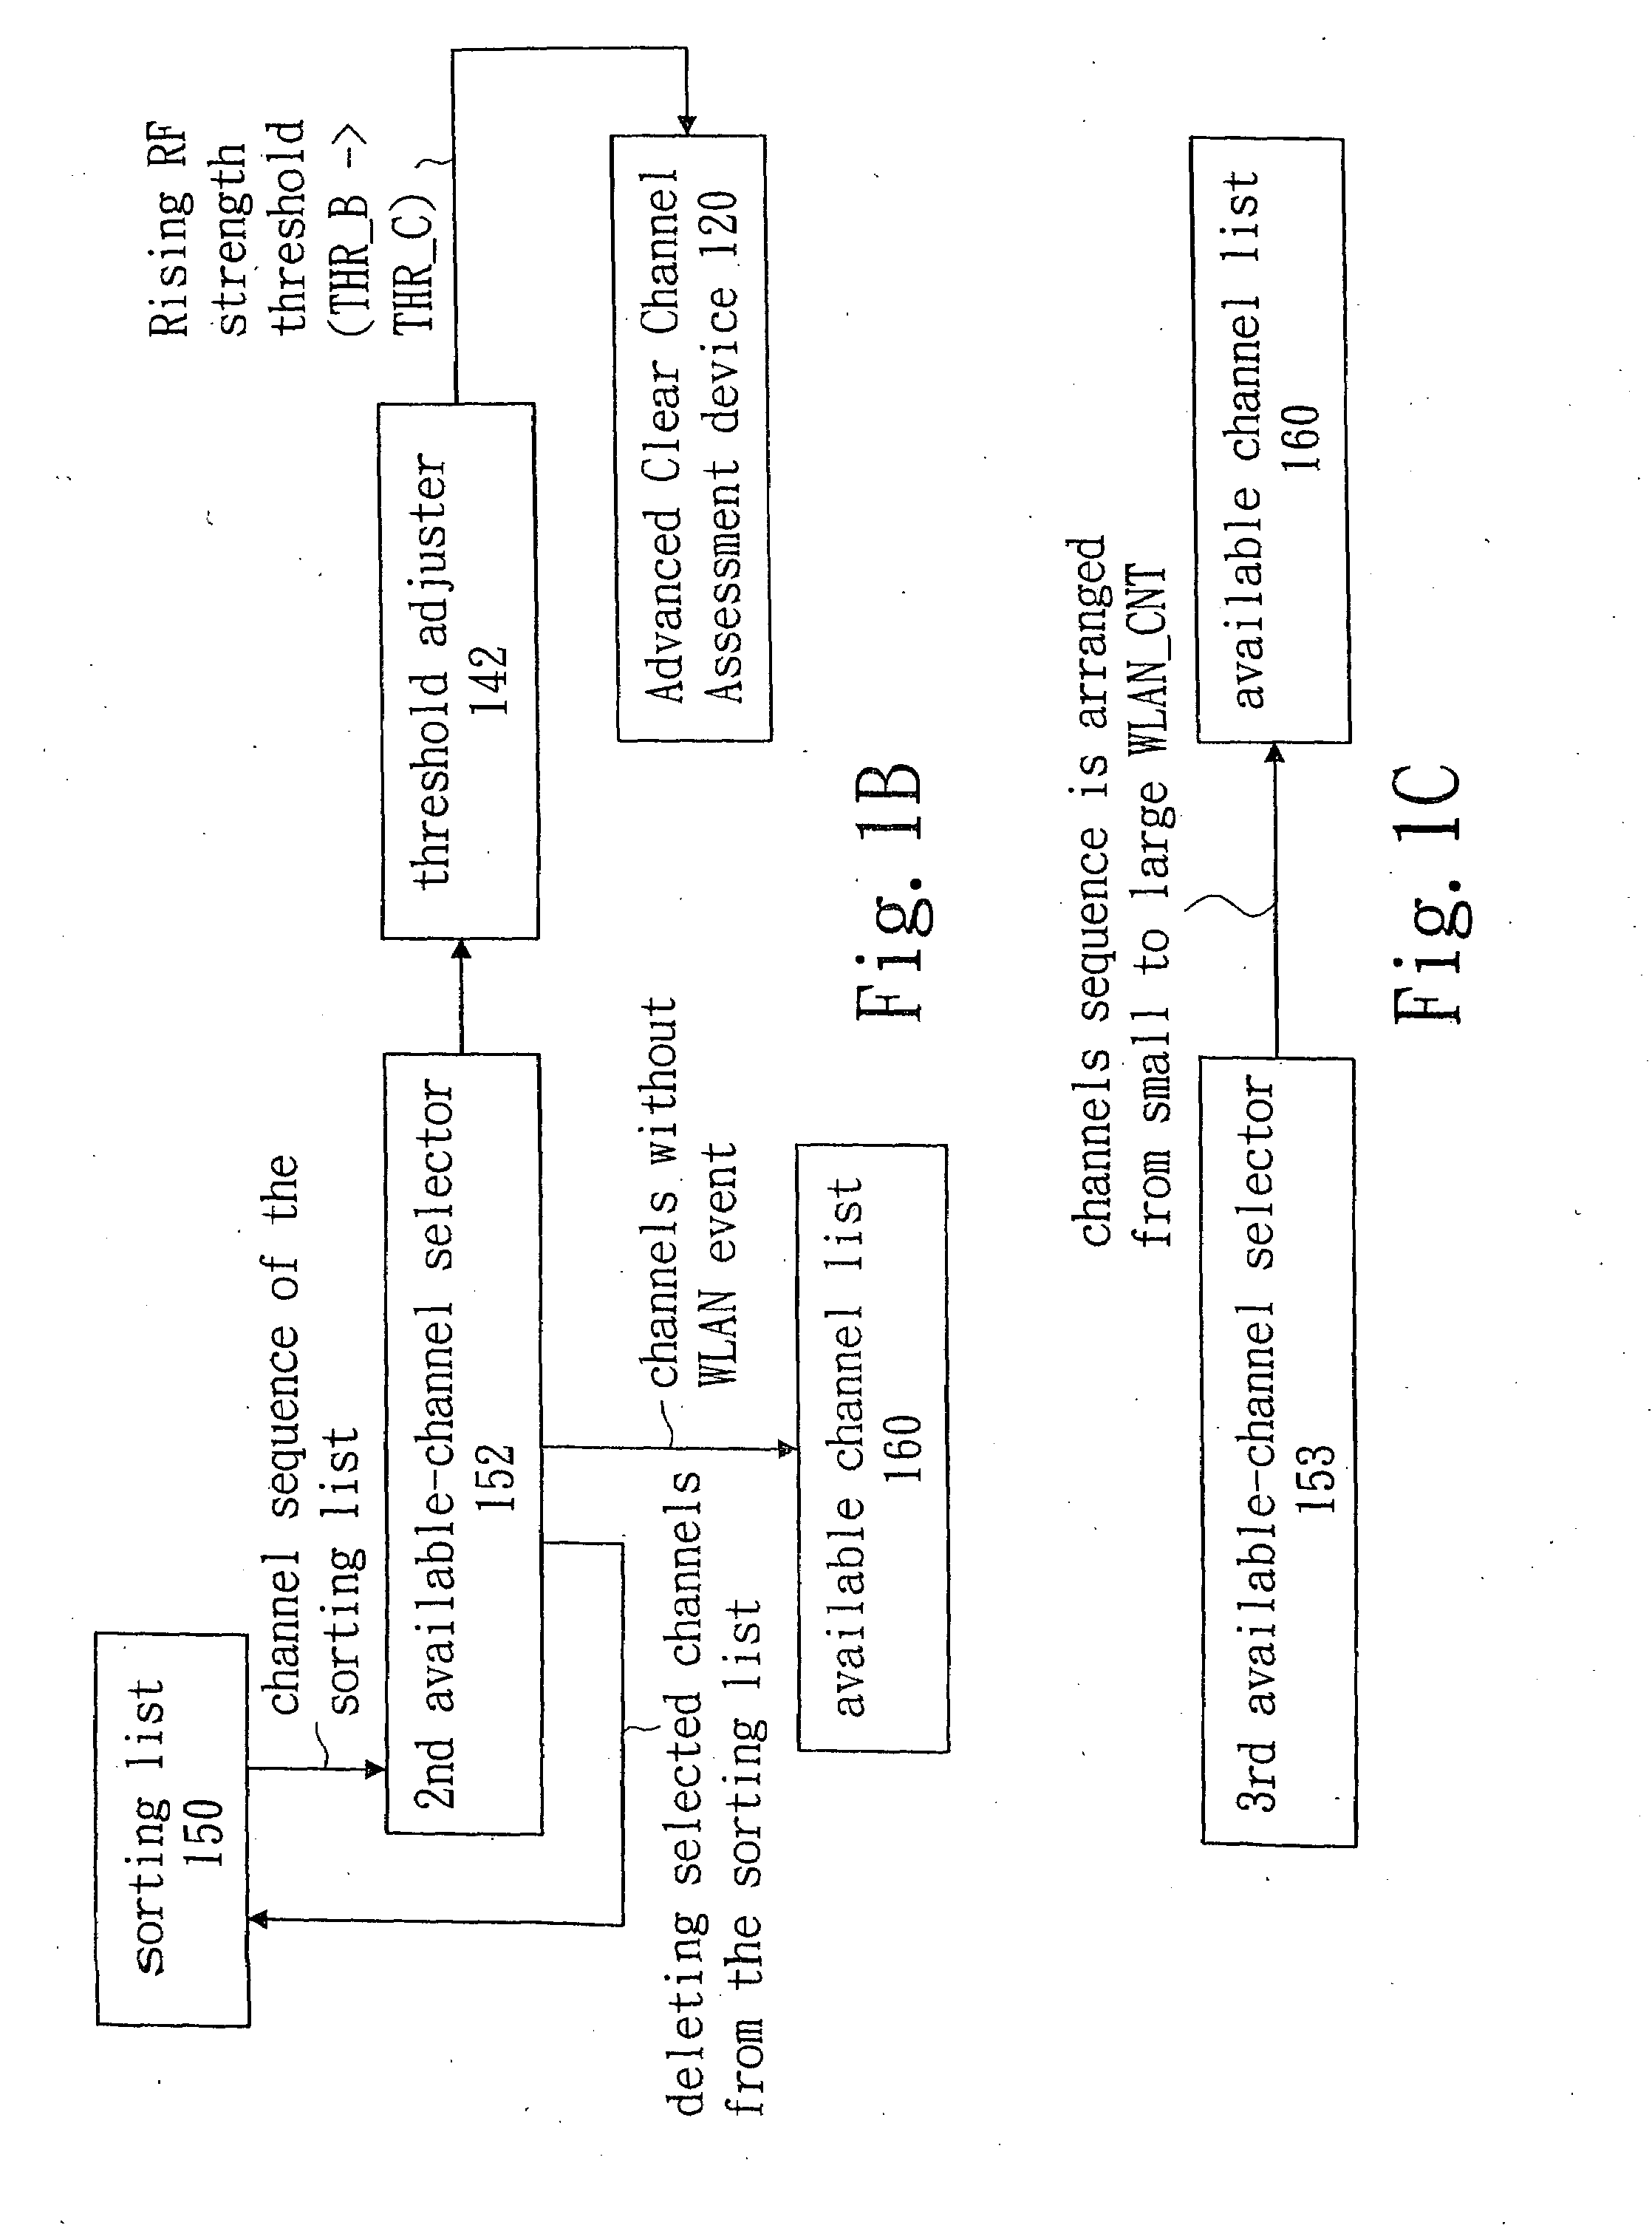 Cognitive radio system and method